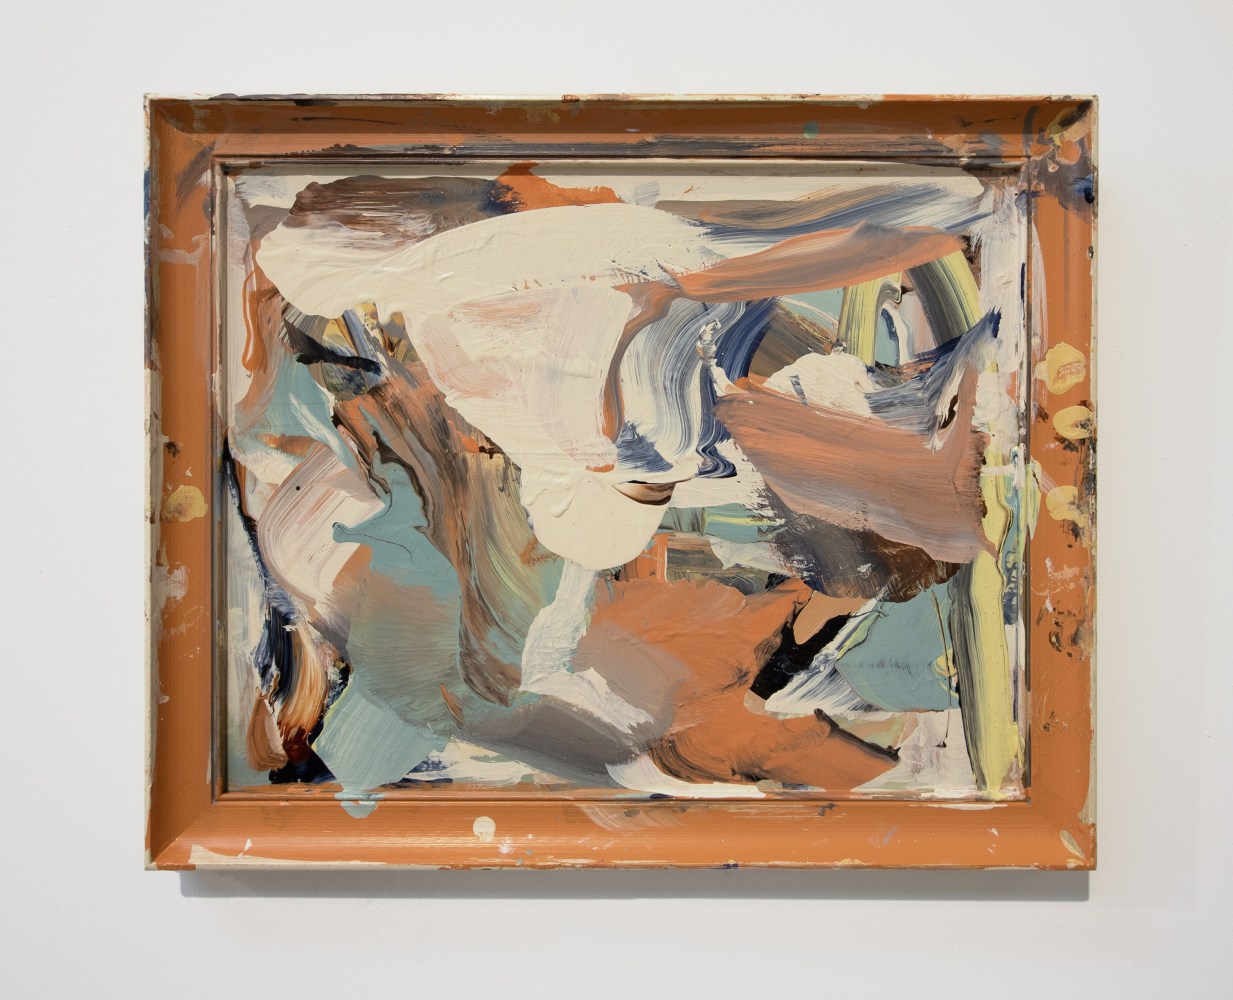 abstract painting with oranges, blue-gray, and off-white broad paint strokes in an orange found frame.